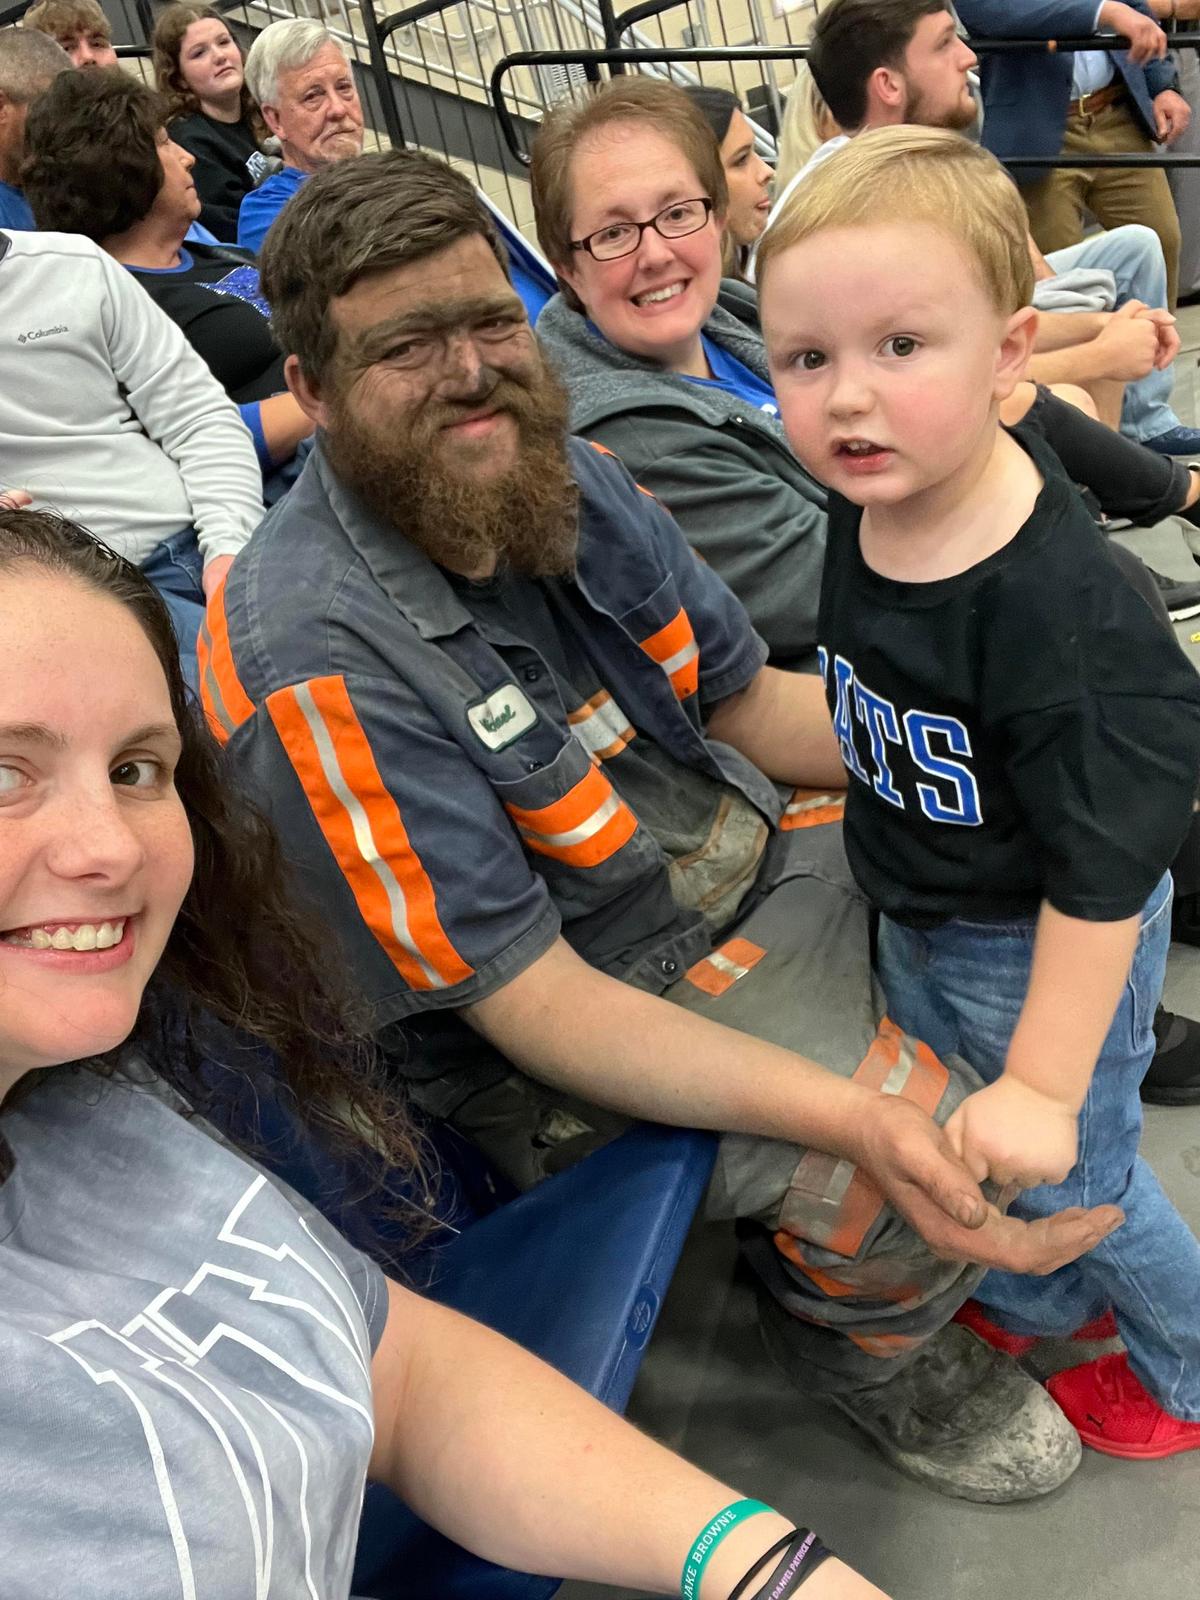 Micheal Joe McGuire attends the University of Kentucky's men's basketball game with his family at Appalachian Wireless Arena in Pikeville, Kentucky. (Courtesy of Mollie McGuire)